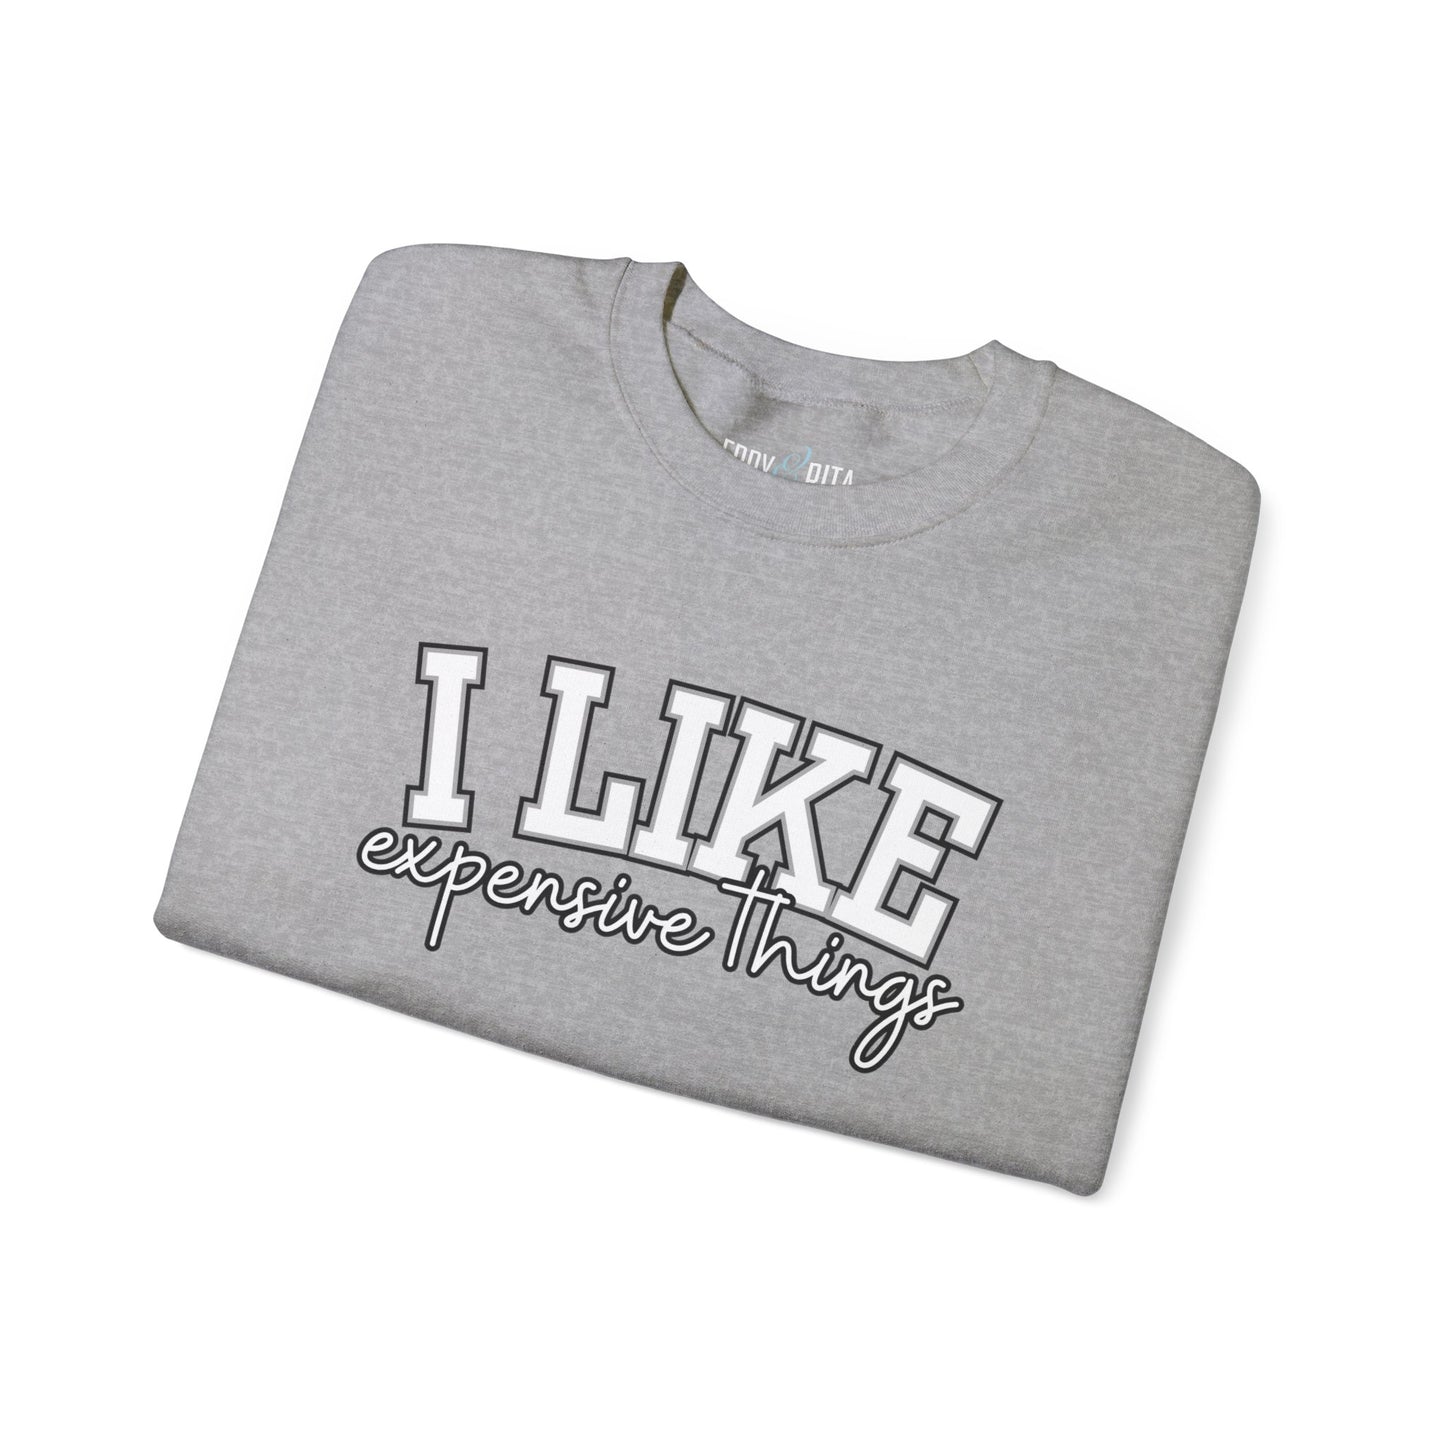 Women's Sweatshirt - 'I Like Expensive Things' - Luxe Comfort and Chic Style for Fashion-Forward Elegance